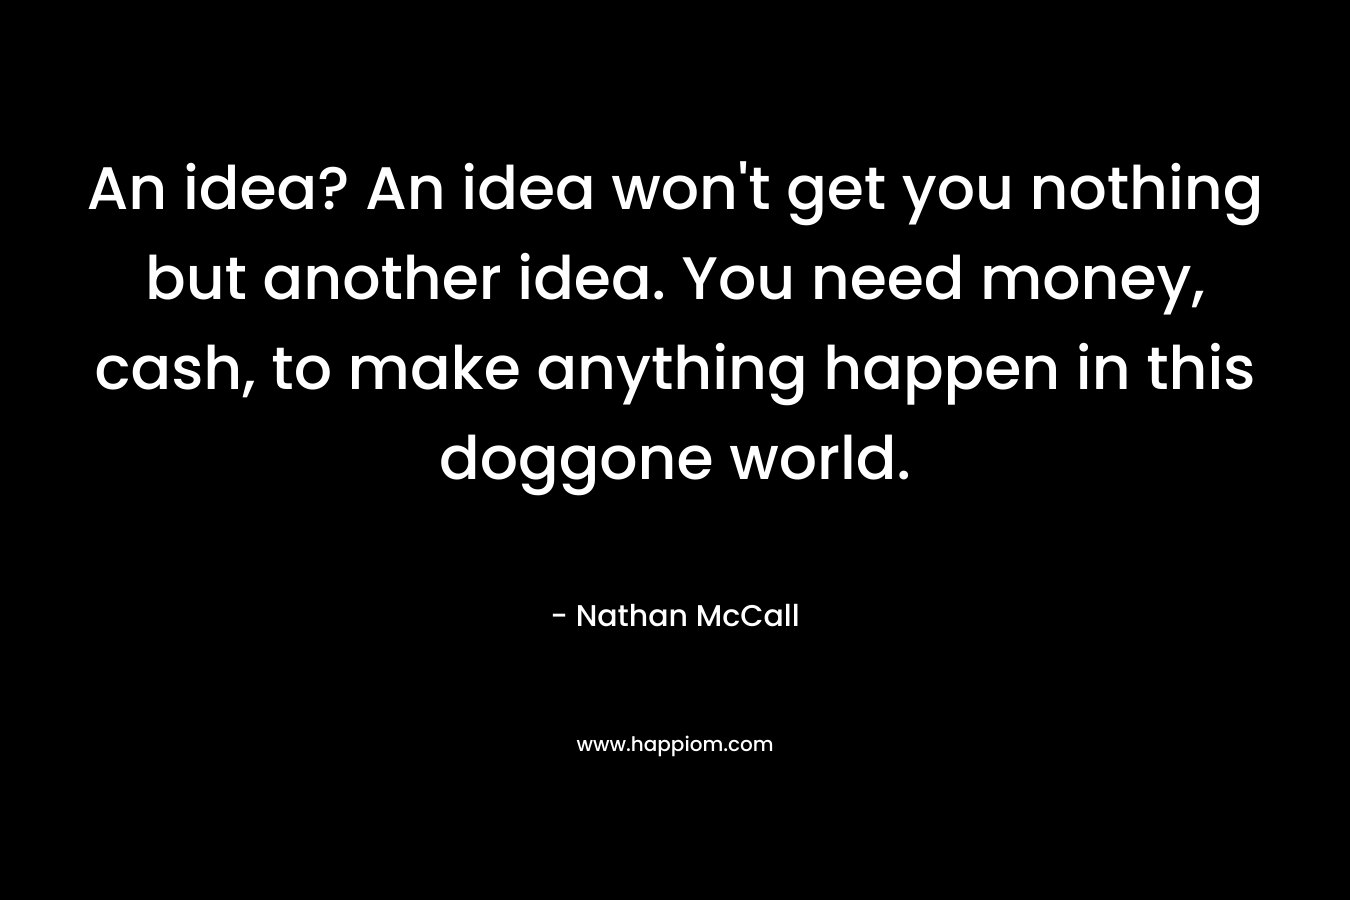 An idea? An idea won’t get you nothing but another idea. You need money, cash, to make anything happen in this doggone world. – Nathan McCall